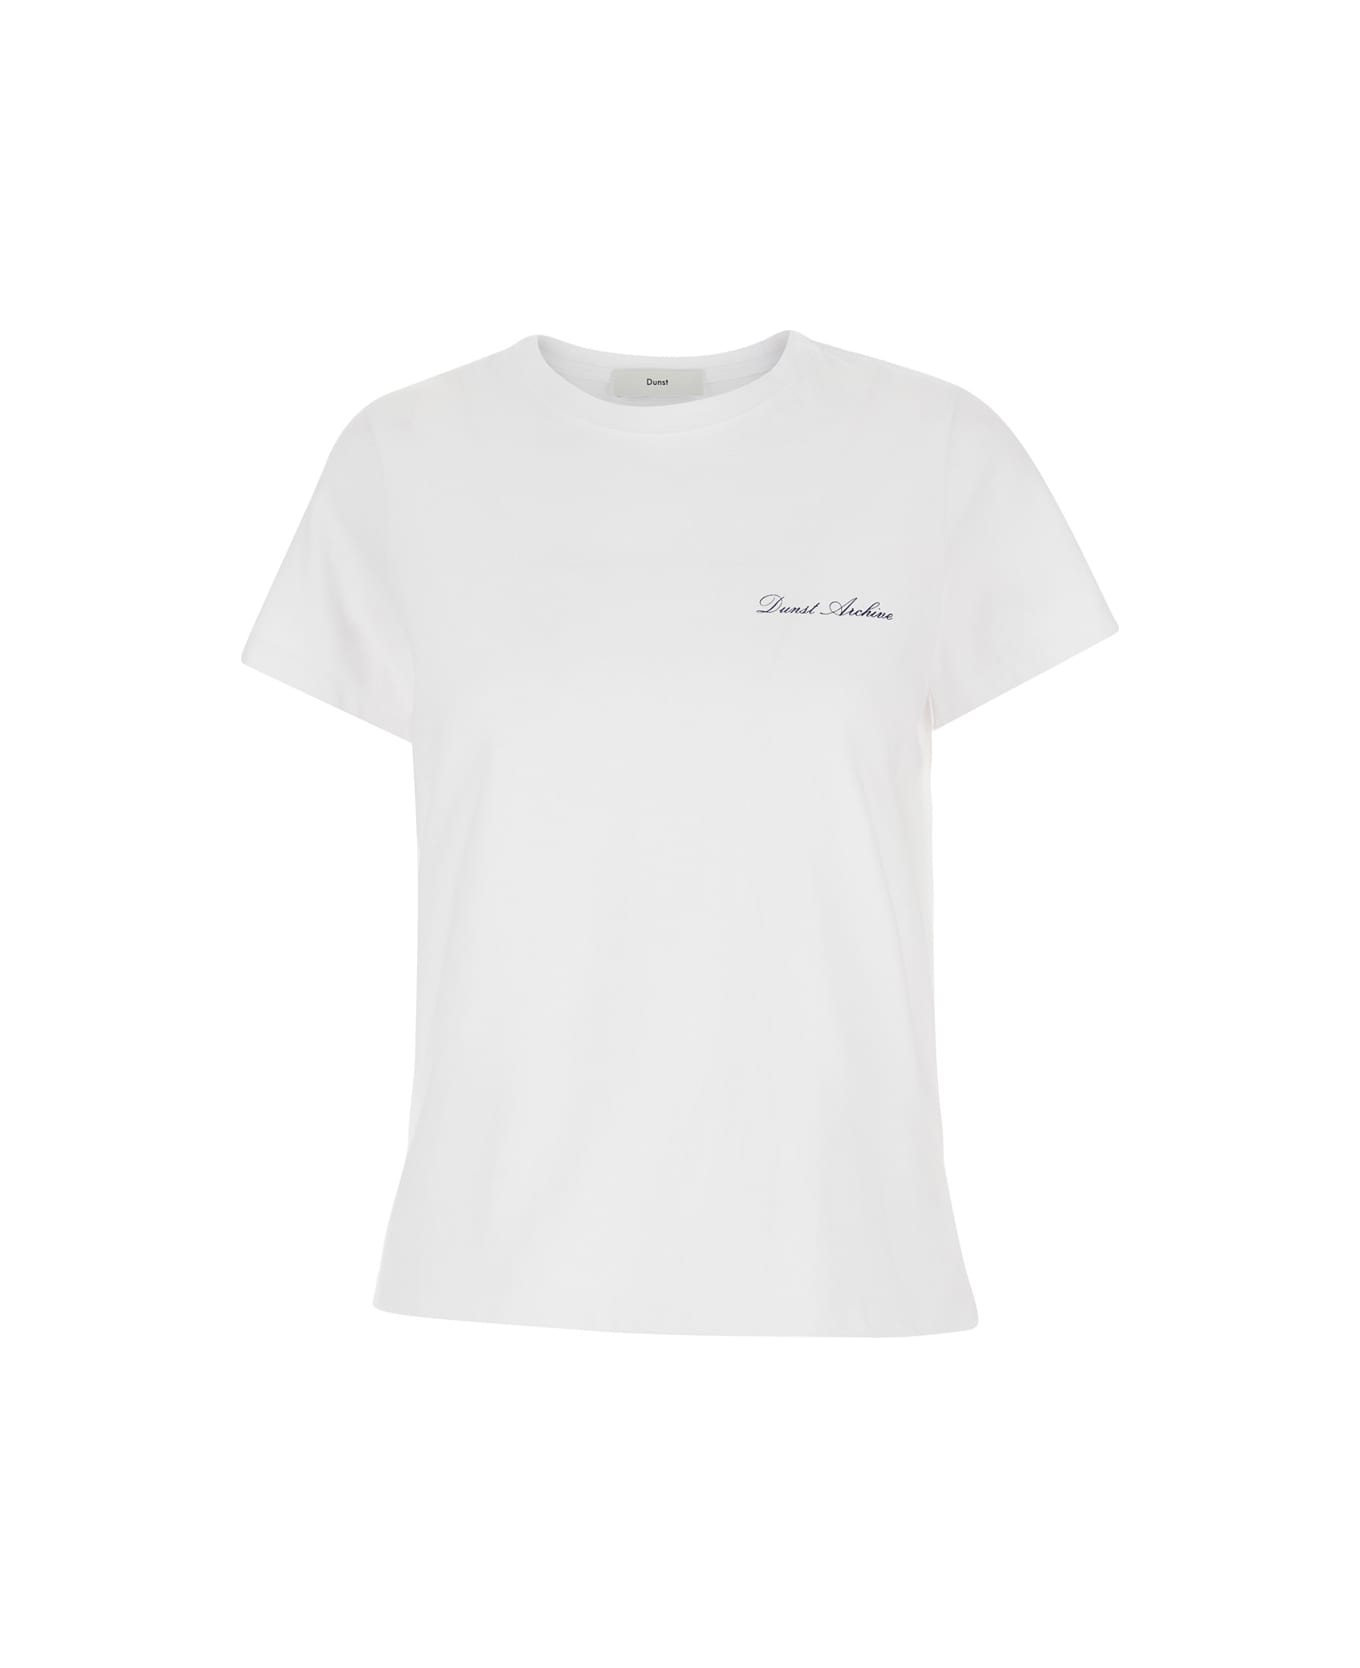 Dunst 'essential' White T-shirt With Slogan Print In Cotton Woman - White